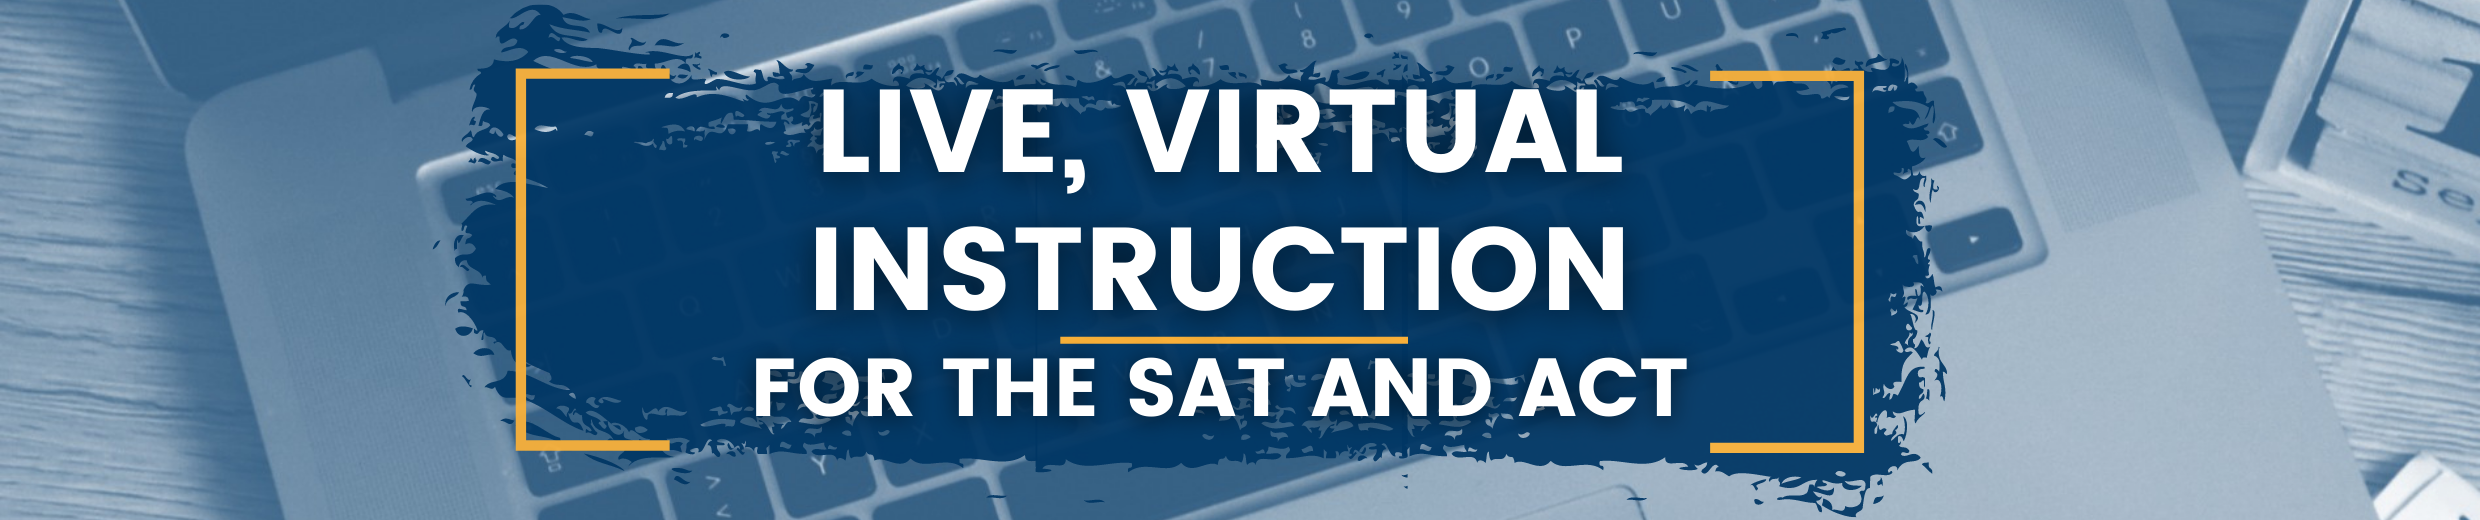 Live, Virtual Instruction for the SAT and ACT